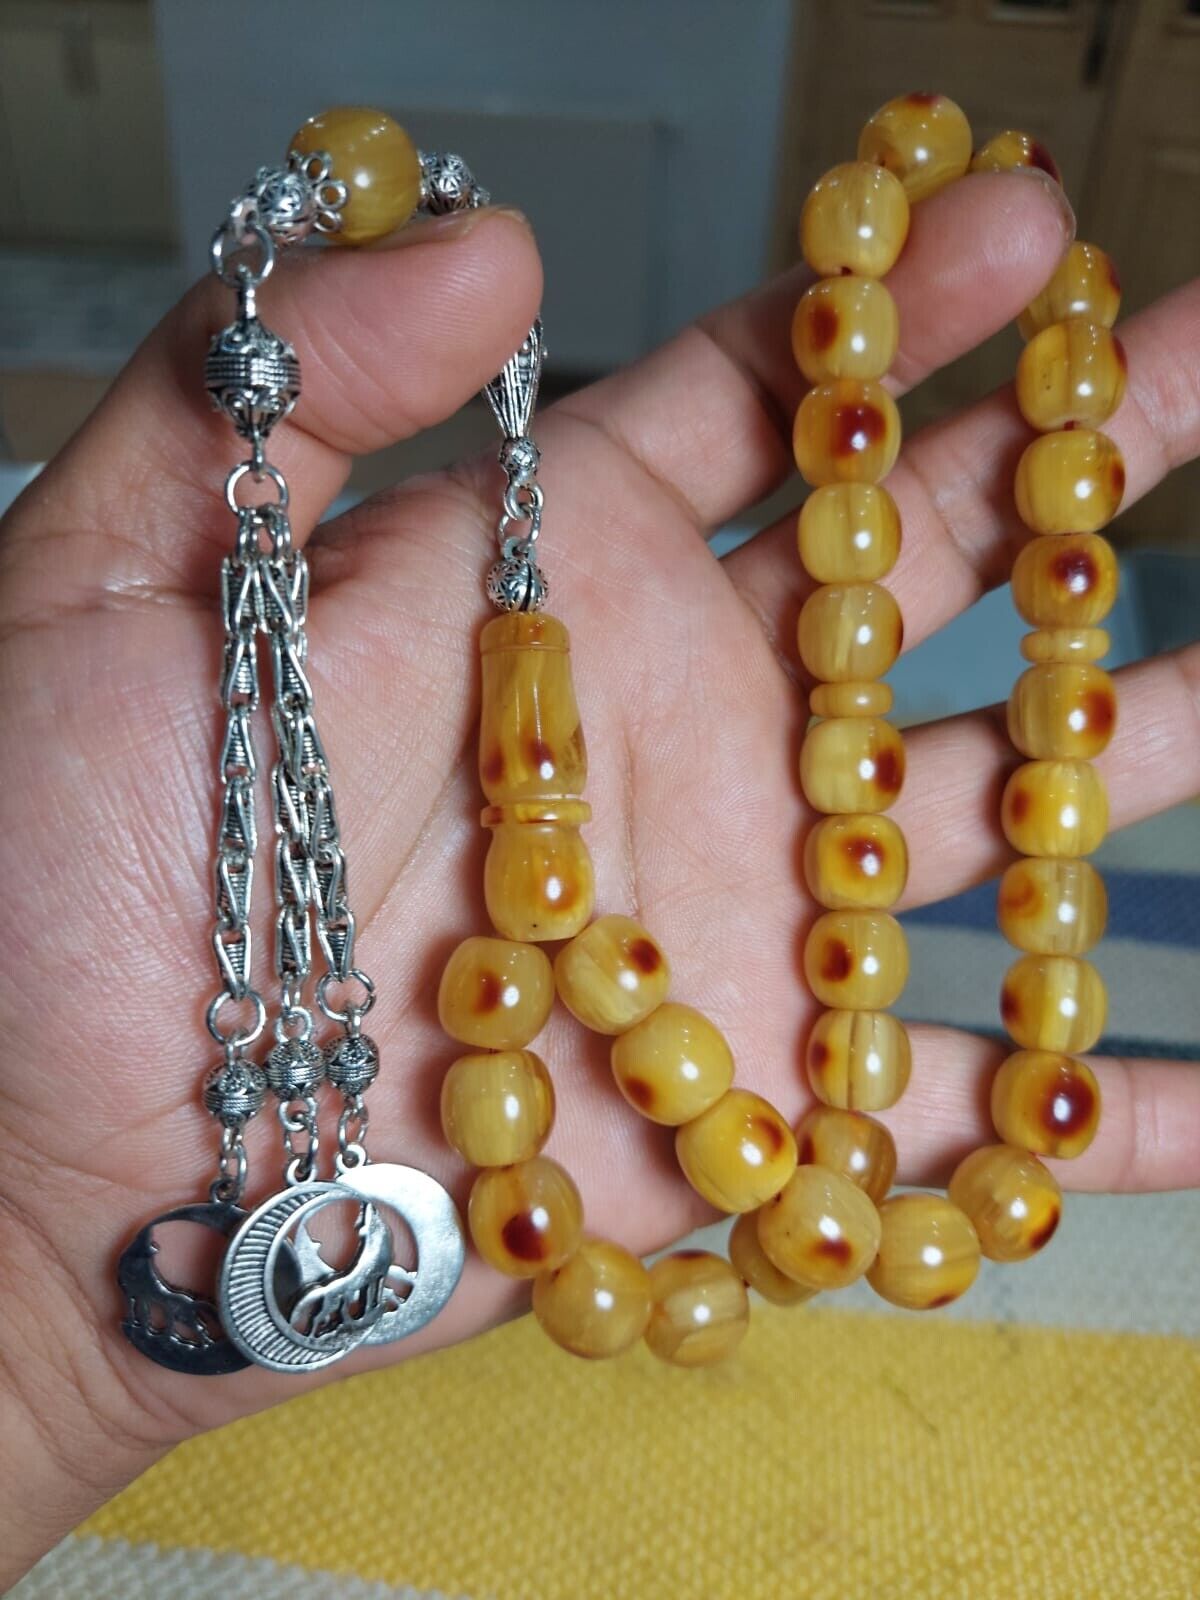 old bacalite amber faturan 11*12 mm handmade 33 beads old rosary